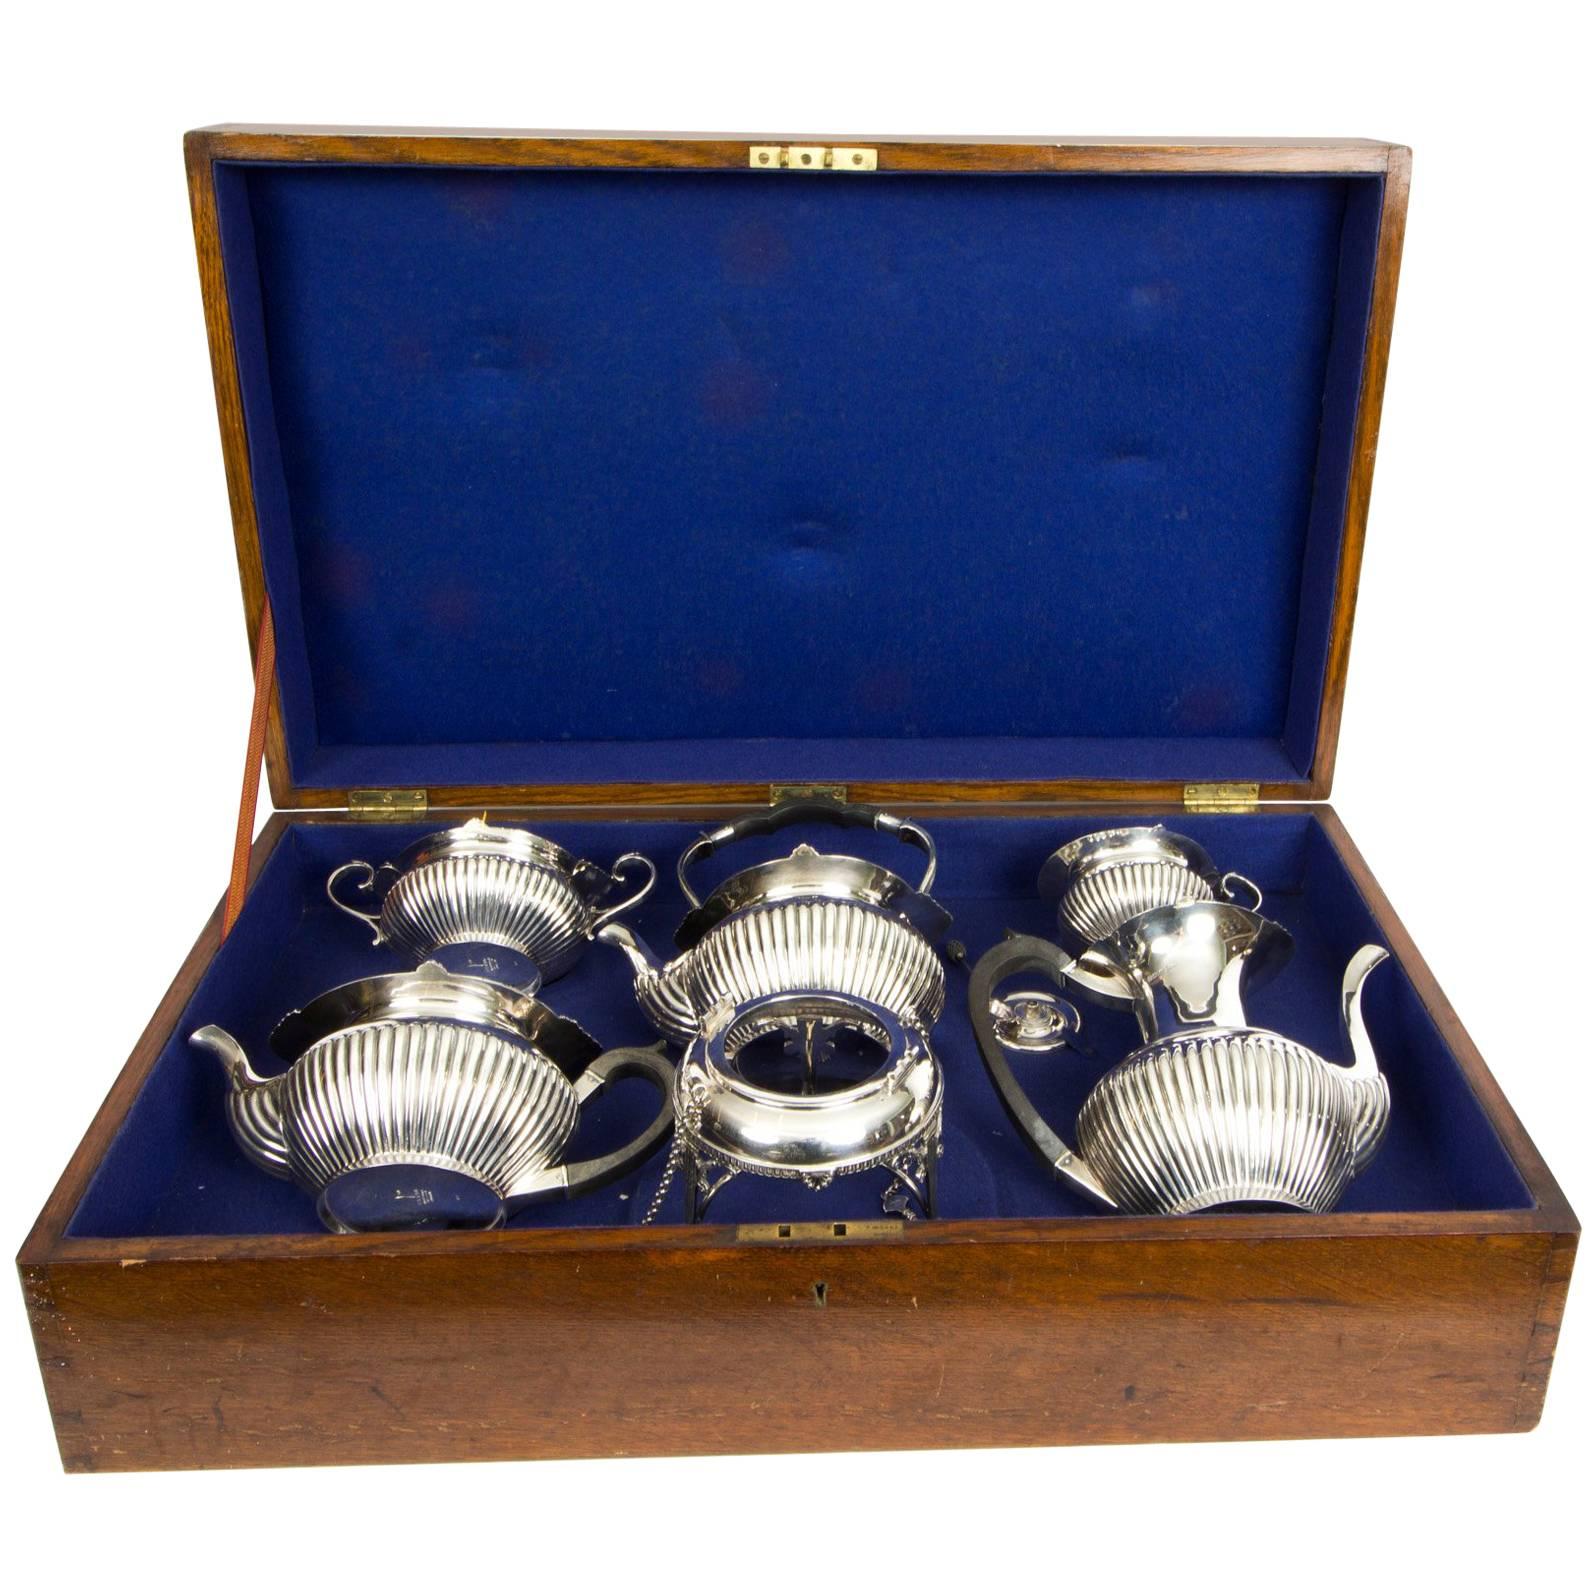 Antique English Edwardian Cased Silver Five x Teaset Walker and Hall, 1908